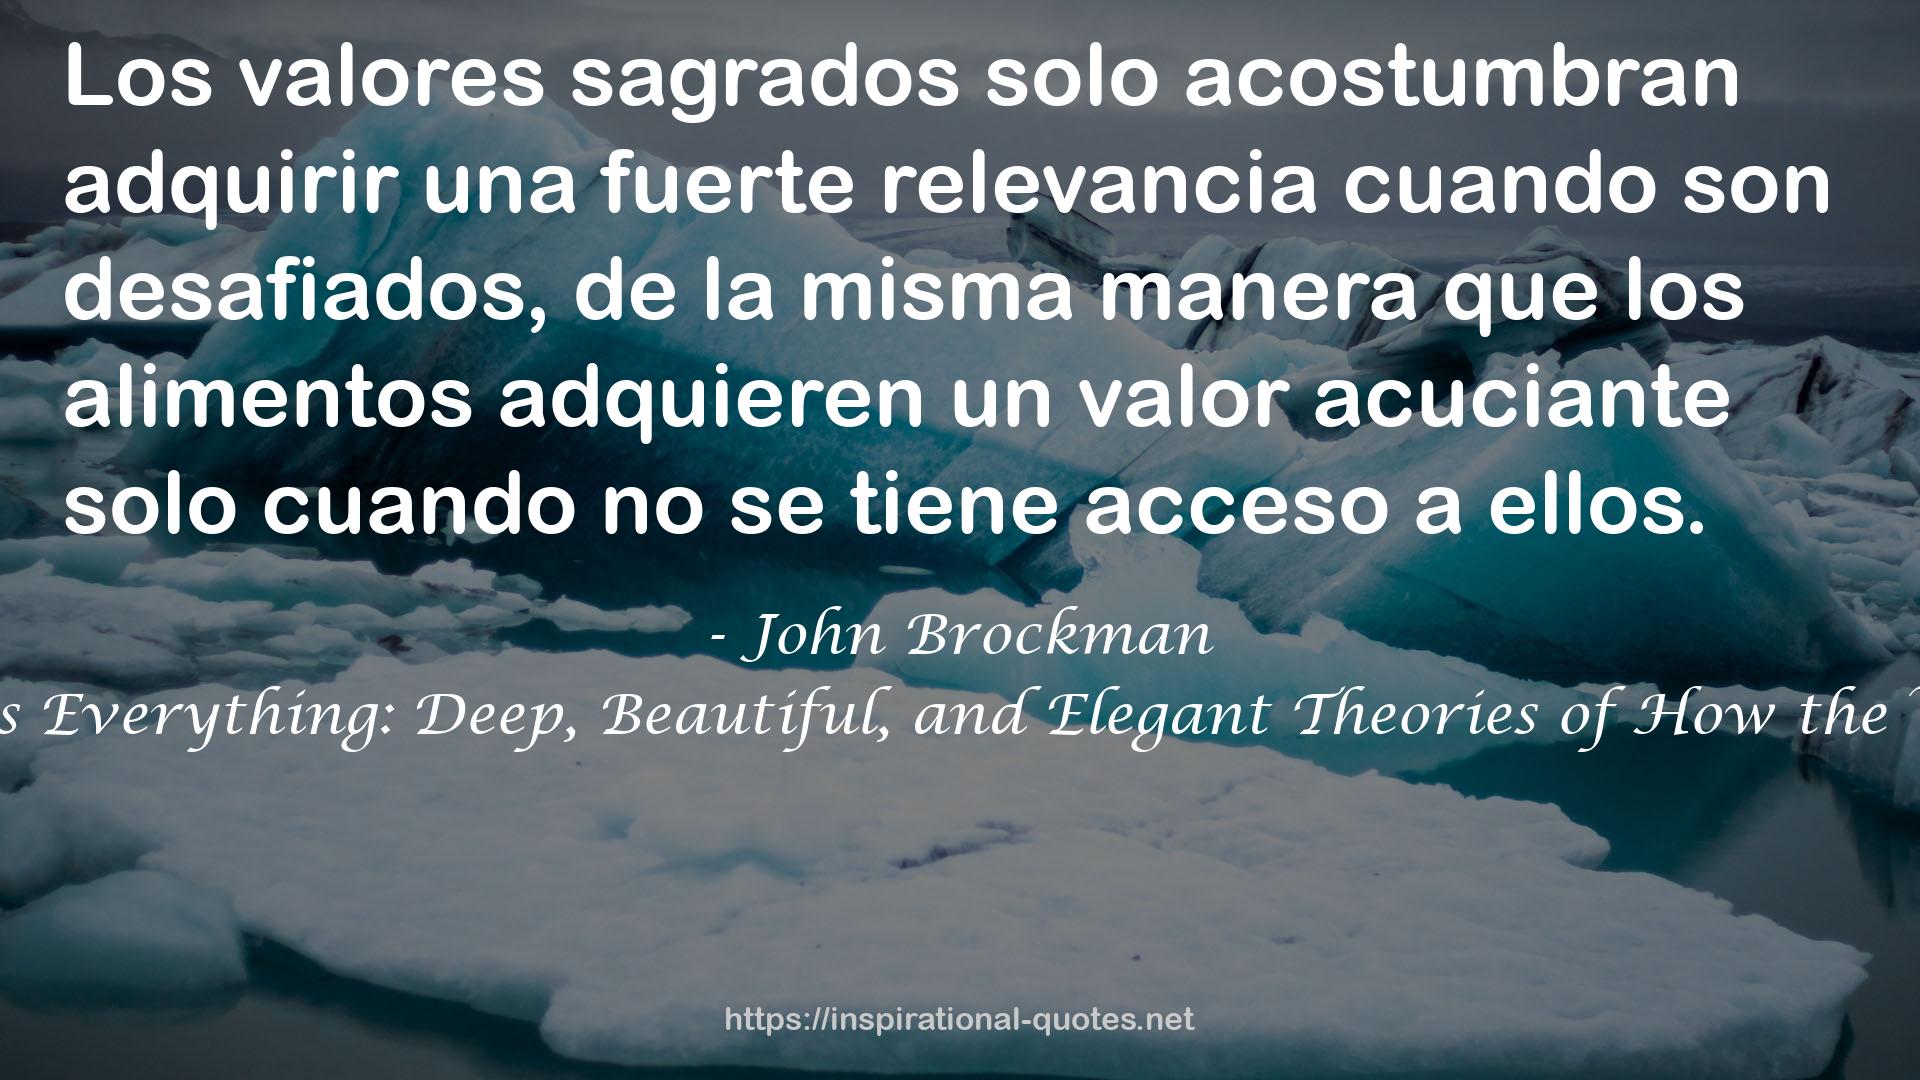 This Explains Everything: Deep, Beautiful, and Elegant Theories of How the World Works QUOTES